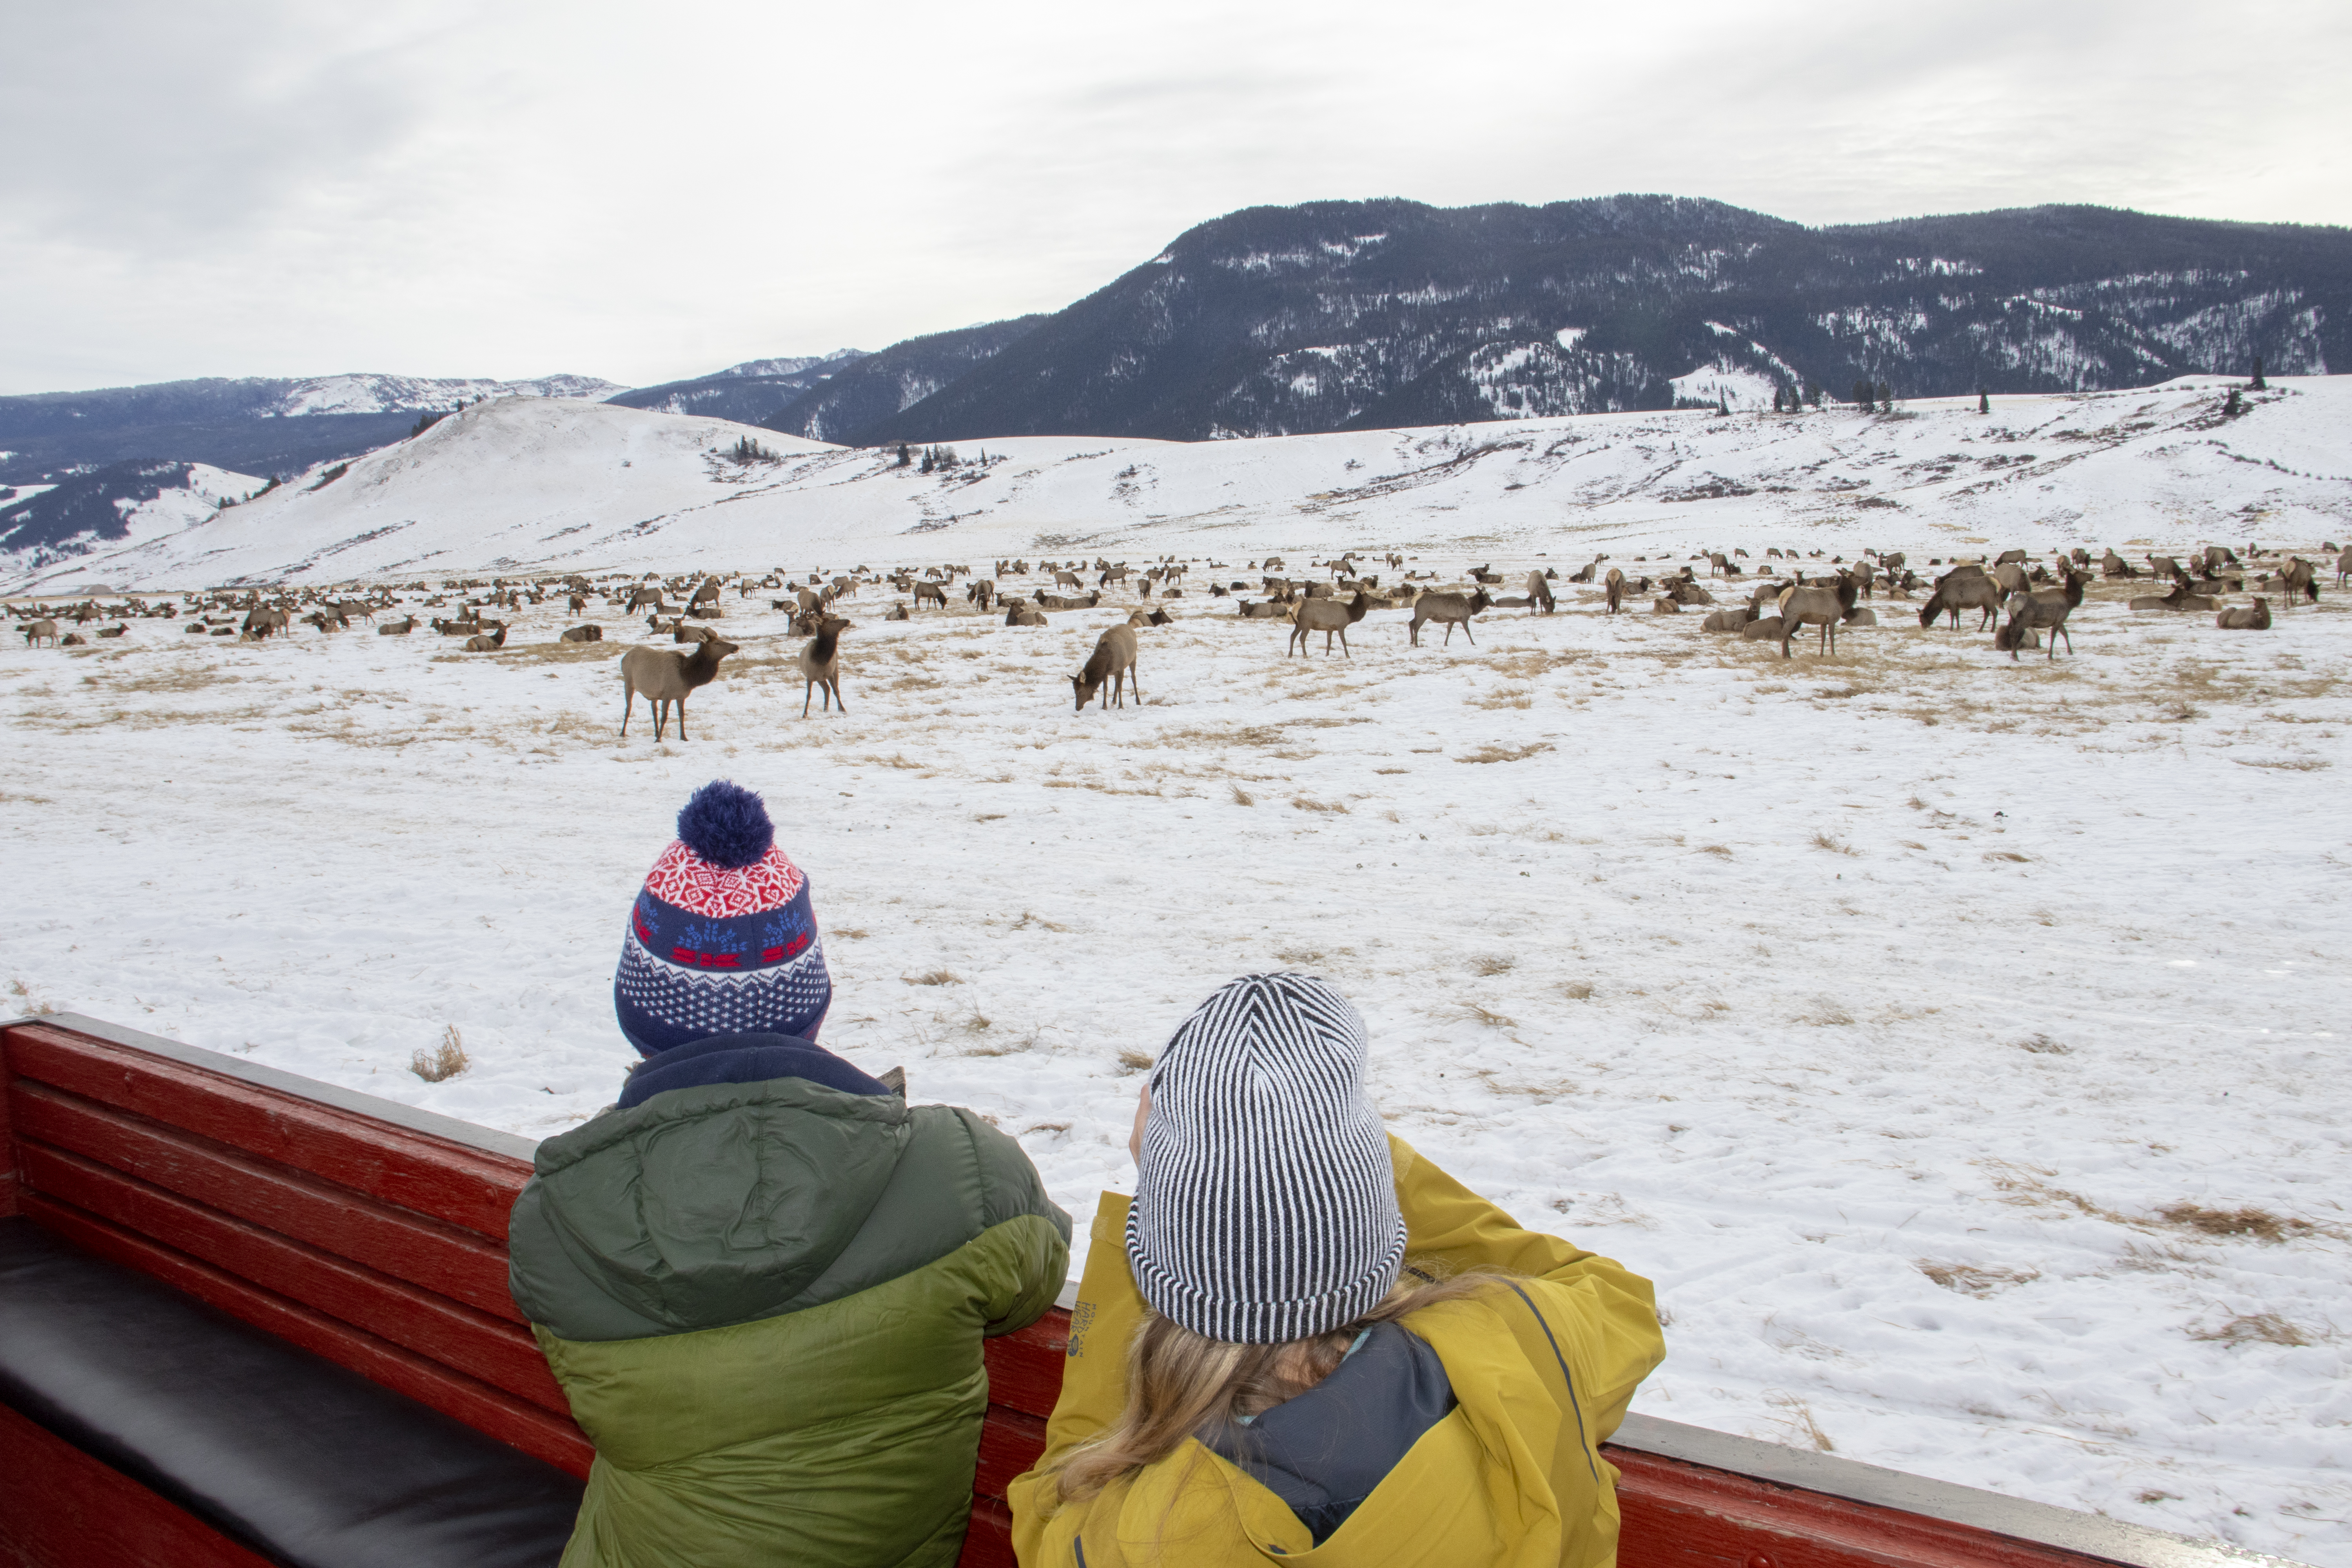 Two children looking at a herd of elk from the bed of a carriage in a snowy landscape with mountains in the background